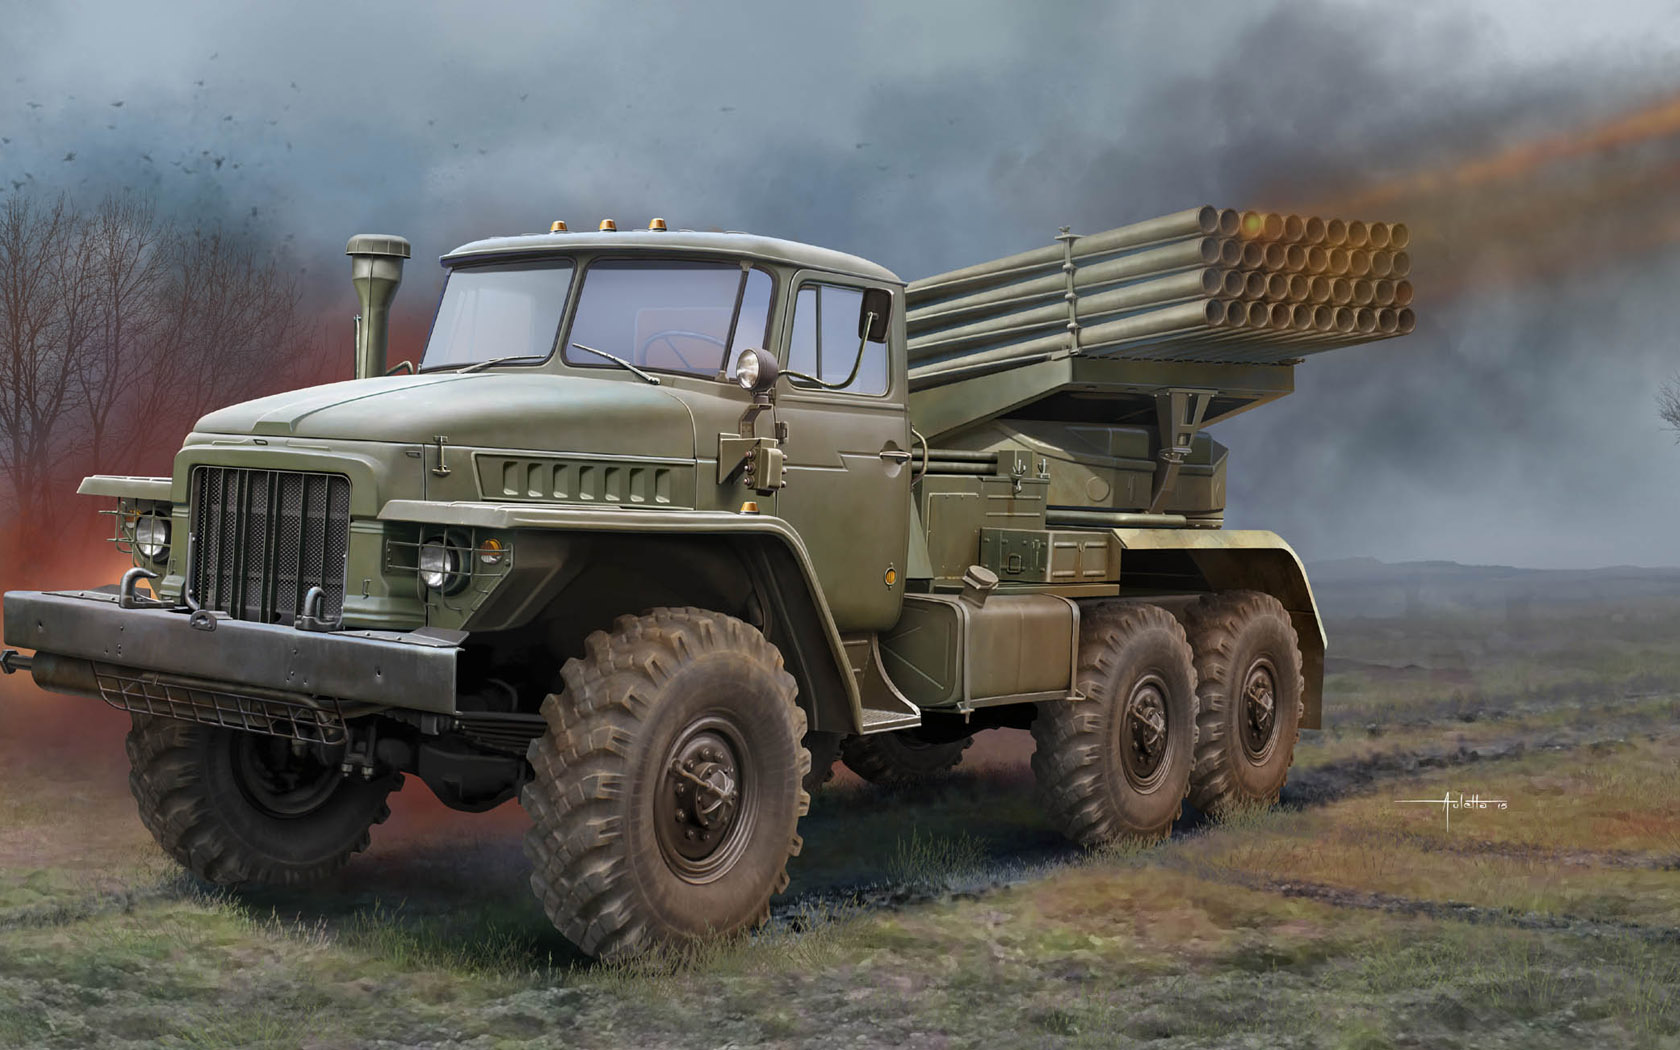 General 1680x1050 army military rocket military vehicle artwork signature clouds sky grass fire trees BM-21 Grad